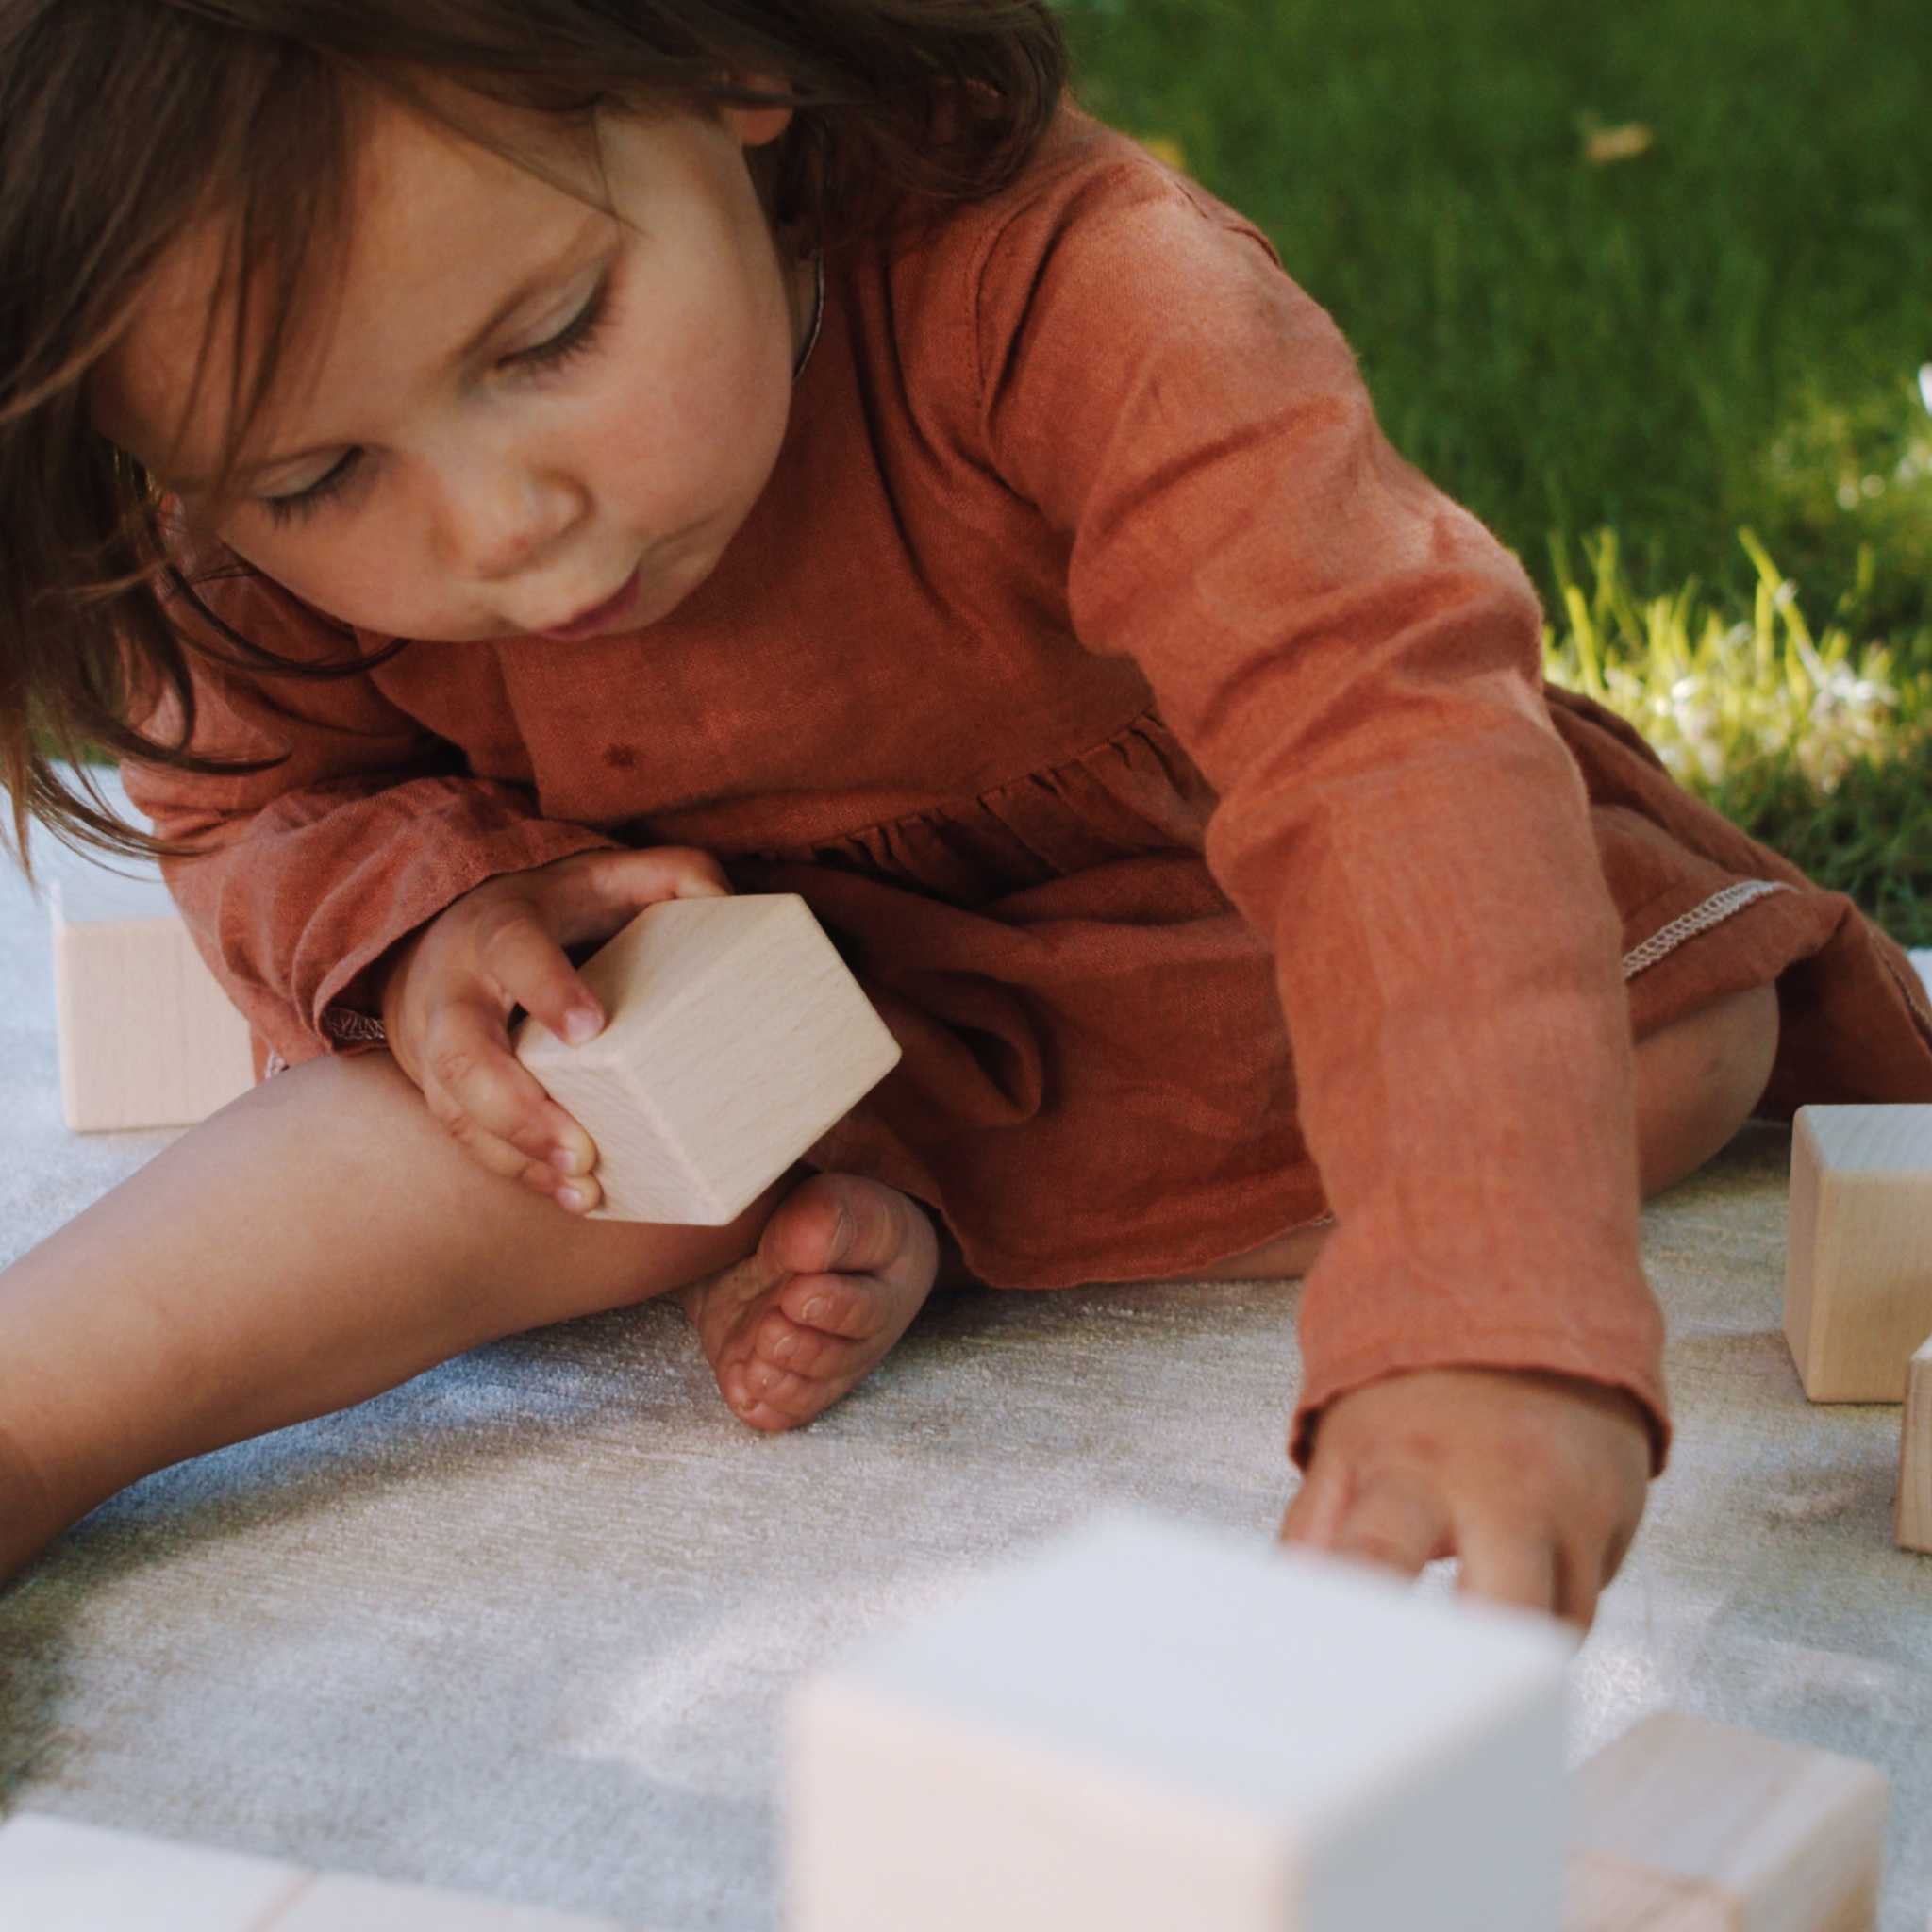 Up Close Of Little Girl Playing With Just Blocks Baby Set In Garden